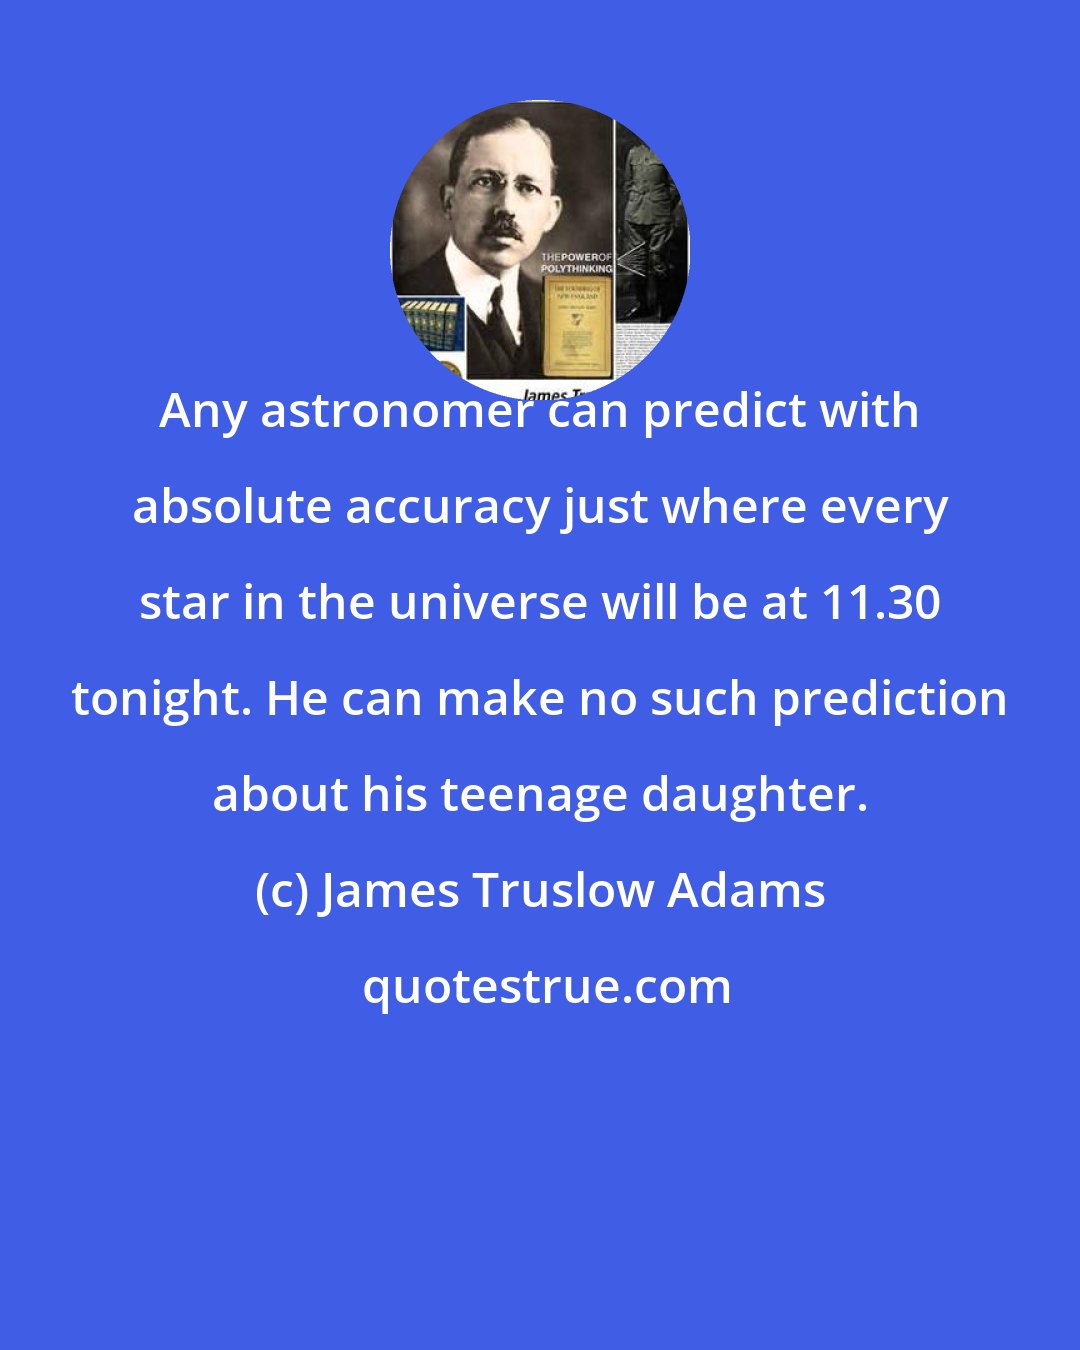 James Truslow Adams: Any astronomer can predict with absolute accuracy just where every star in the universe will be at 11.30 tonight. He can make no such prediction about his teenage daughter.